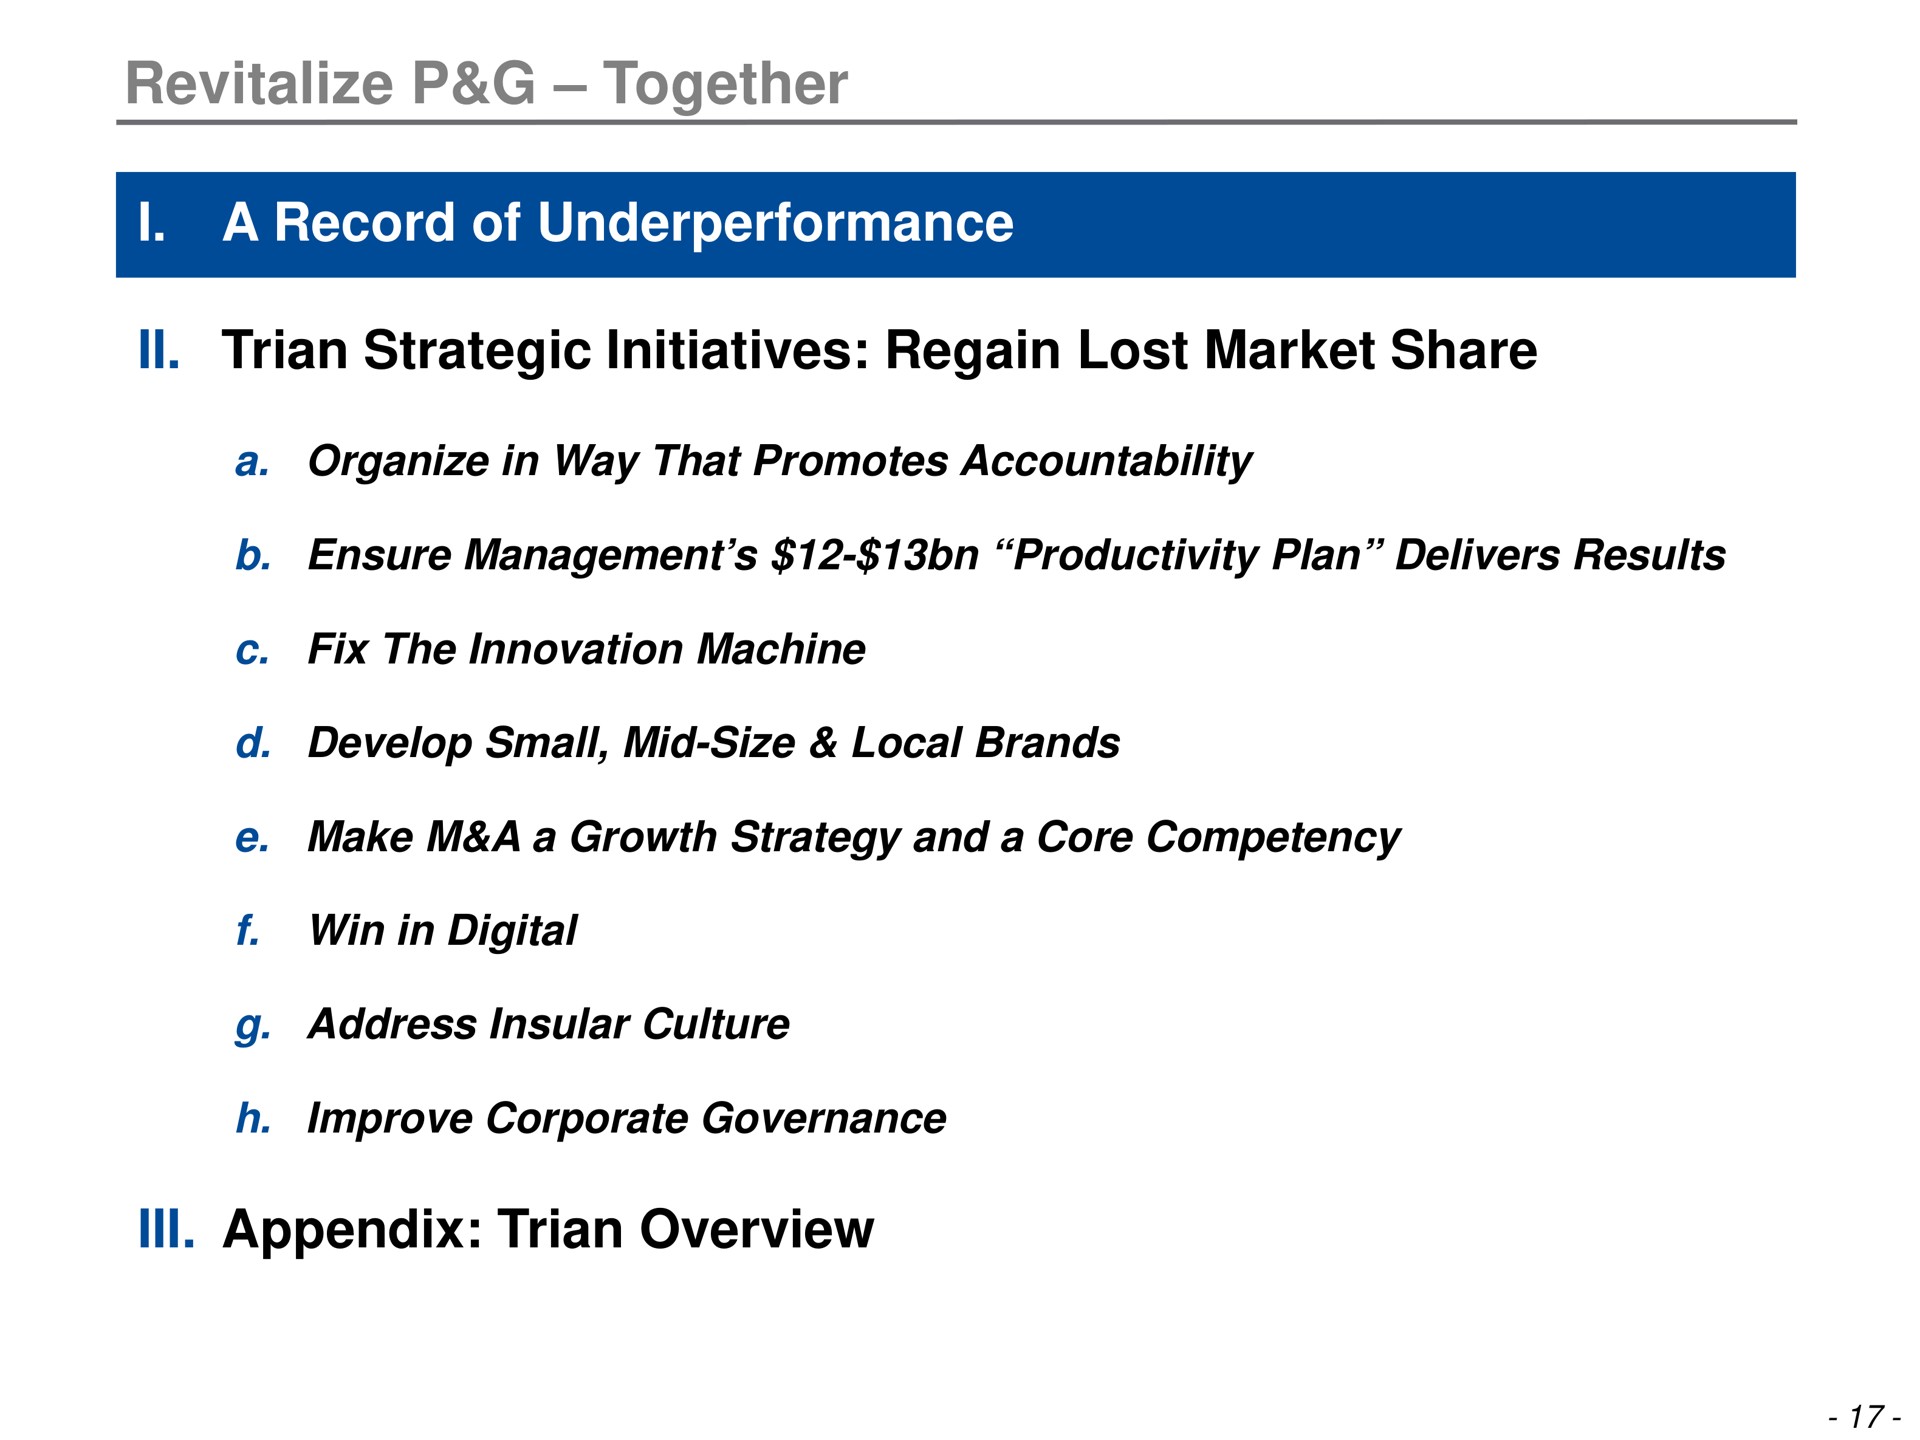 revitalize together i a record of strategic initiatives regain lost market share a organize in way that promotes accountability ensure management productivity plan delivers results fix the innovation machine develop small mid size local brands make a a growth strategy and a core competency win in digital address insular culture improve corporate governance appendix overview | Trian Partners